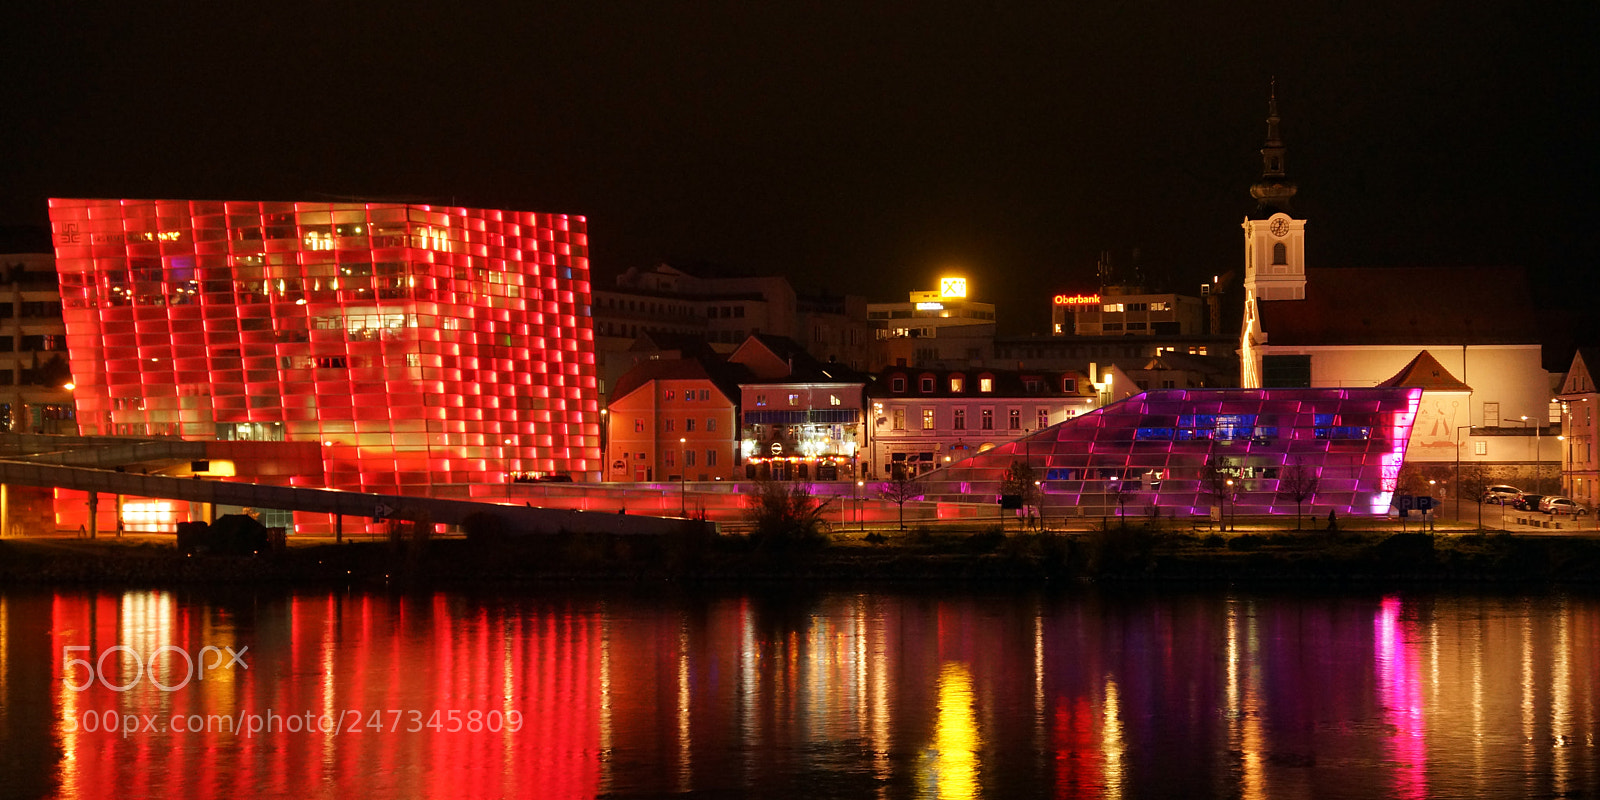 Sony SLT-A77 sample photo. Ars electronica photography